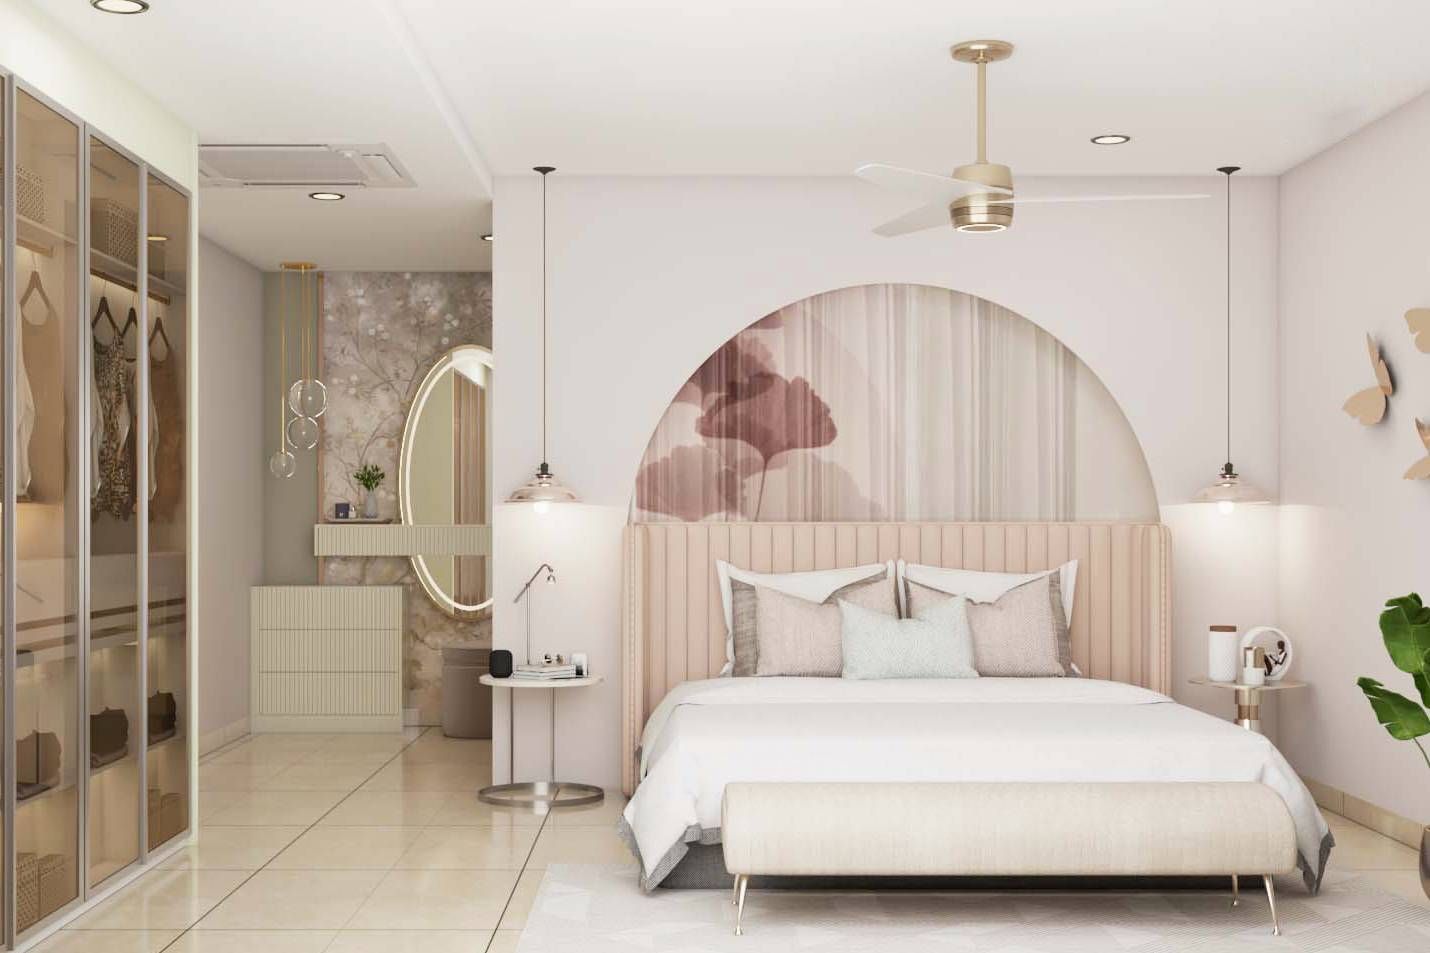 Contemporary Master Bedroom Design With Arched Wall And Floral Wallpaper